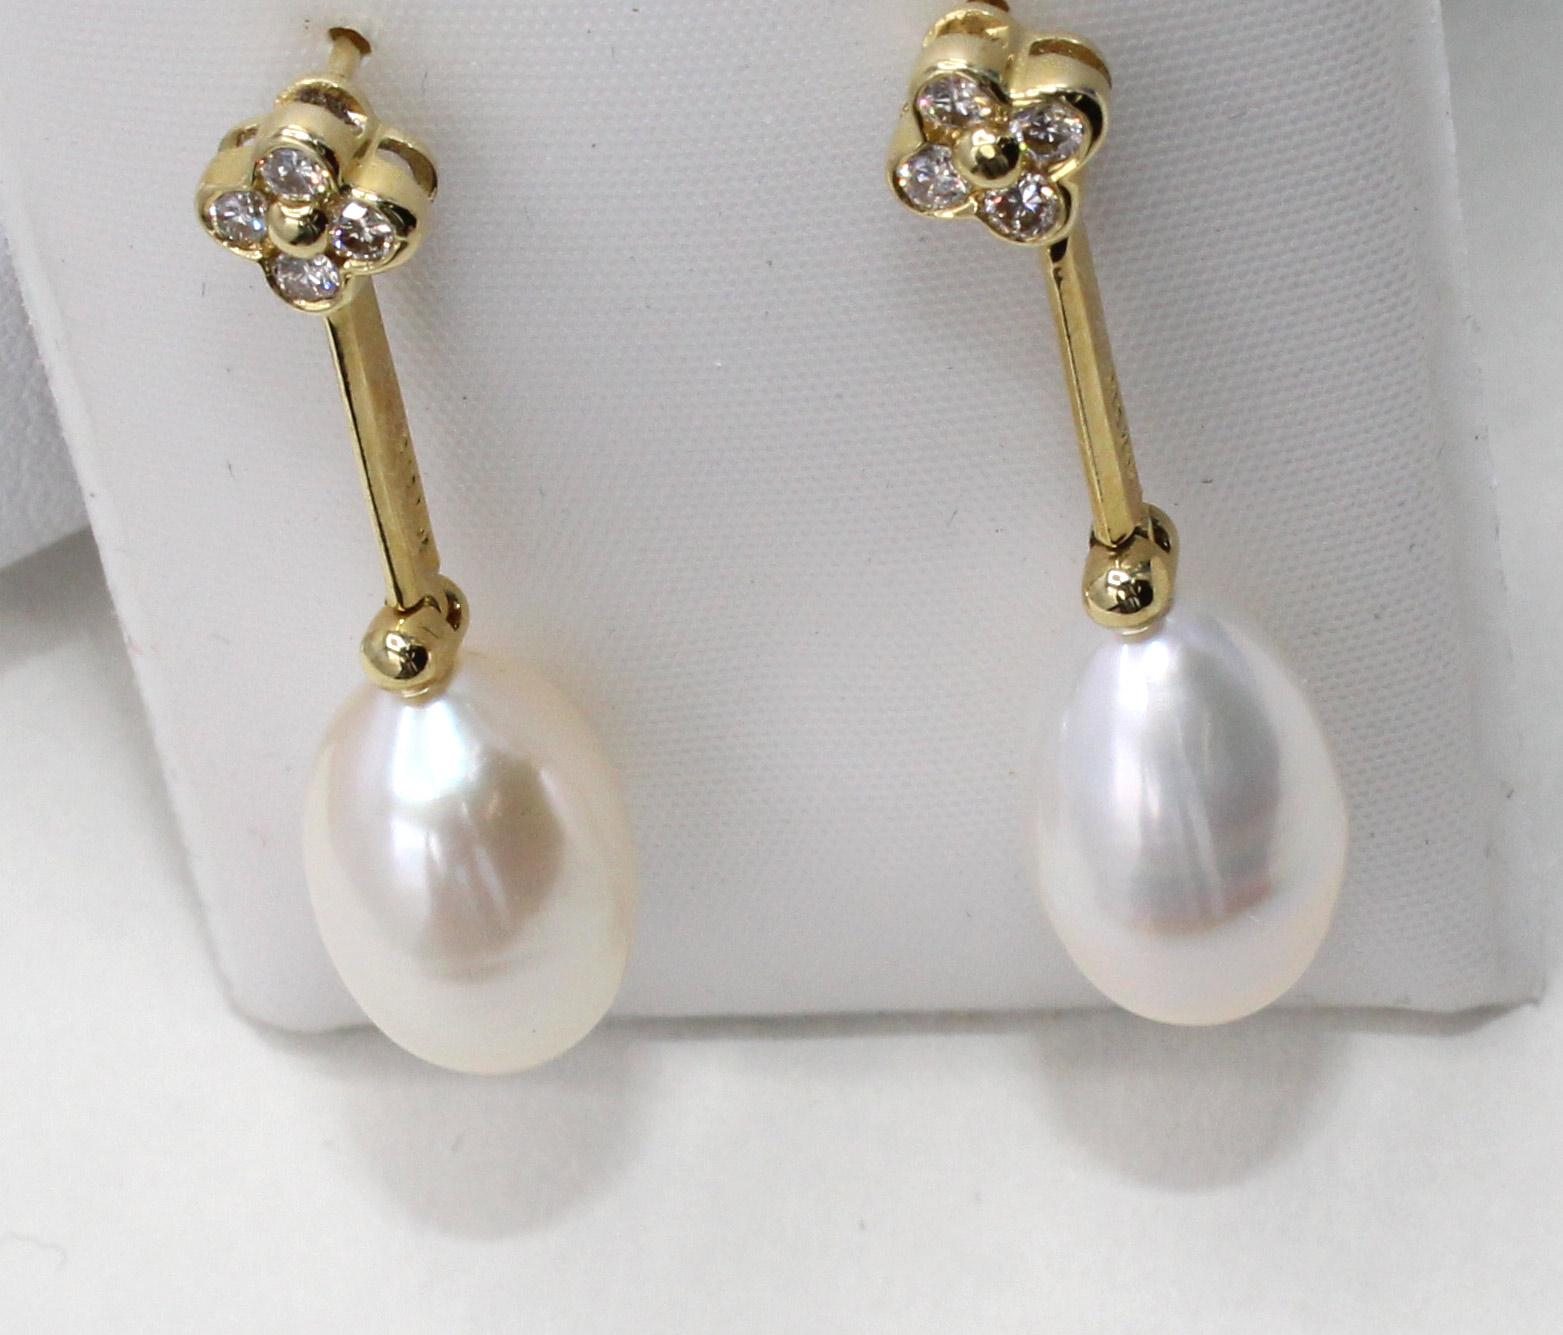 These chic and flexible ear pendants feature 2 perfectly matched tear-drop shape cultured pearls measuring 13.30 millimeters in length and 8.6 millimeters in width. The pearls have an amazing luster and are white in color with a slight cream hew.